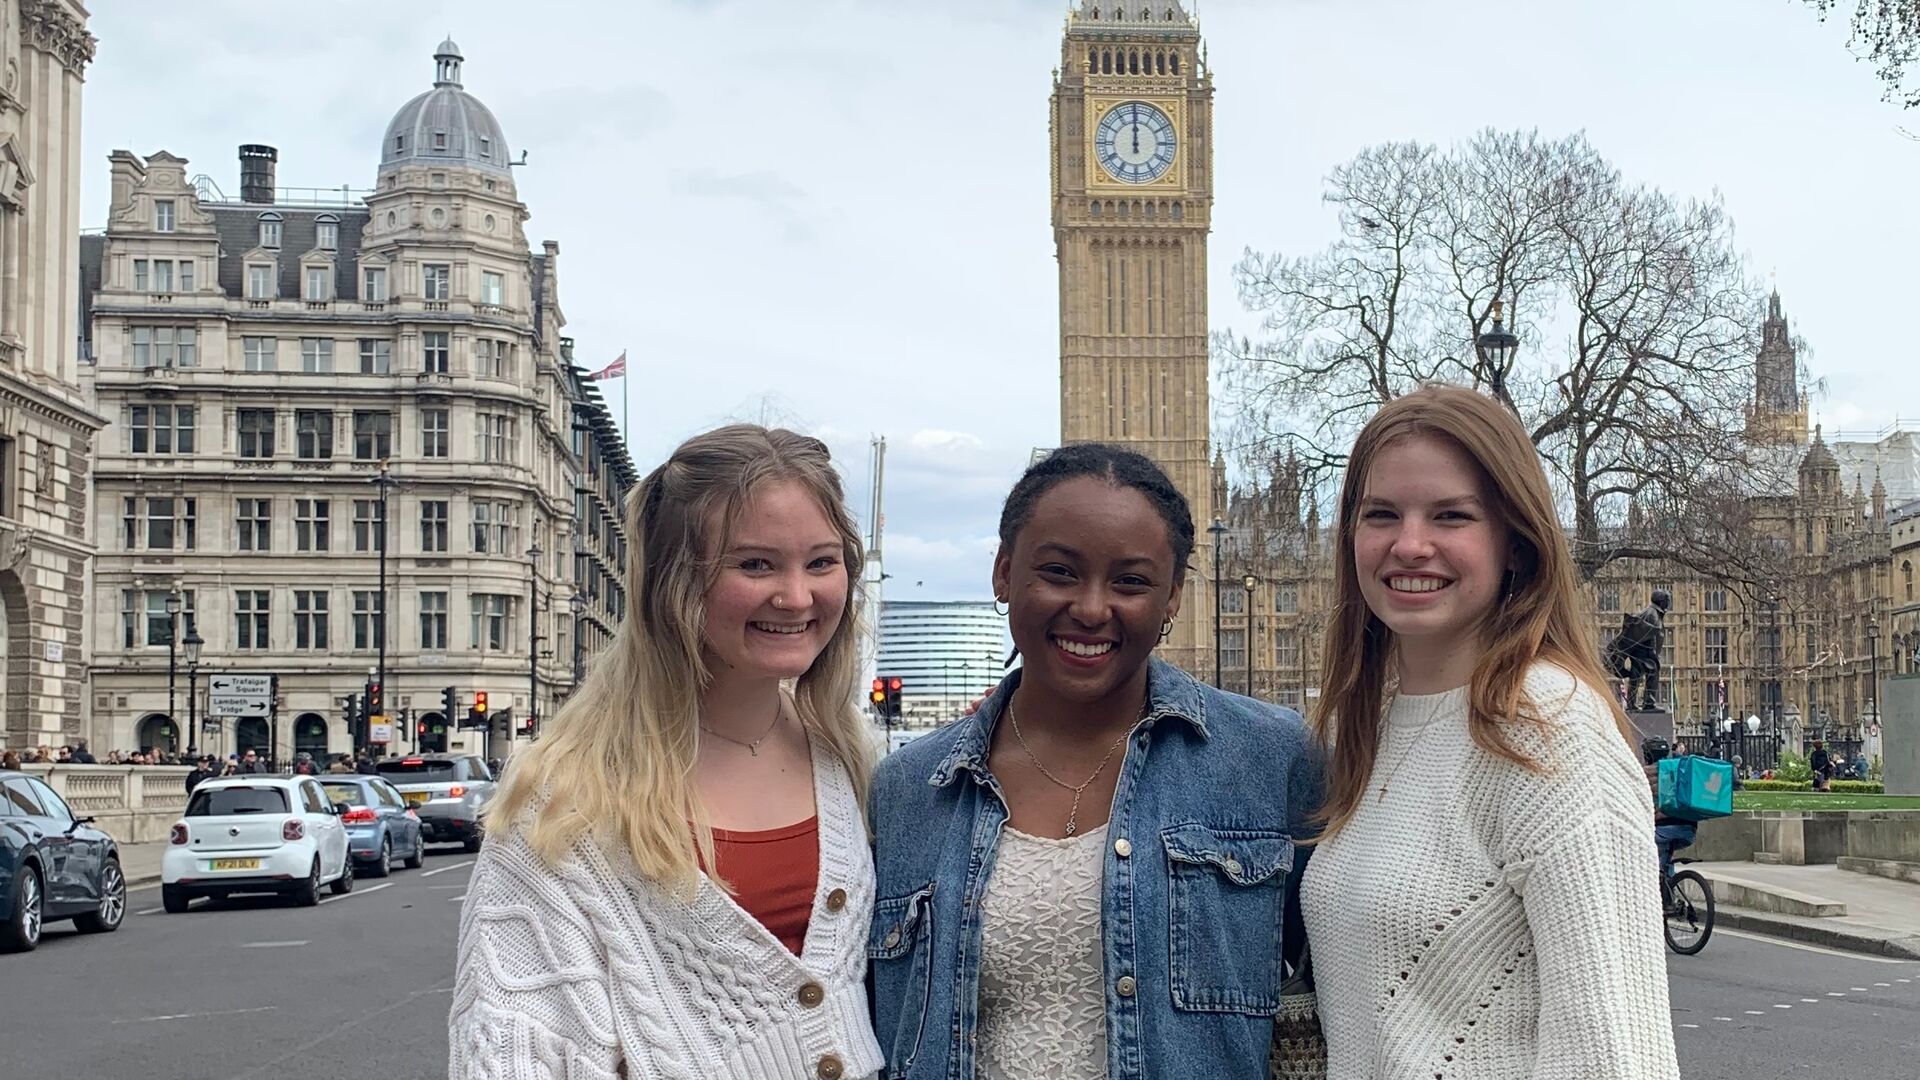 Three students standing in the street in front of Big Ben as a part of the London Honors program.